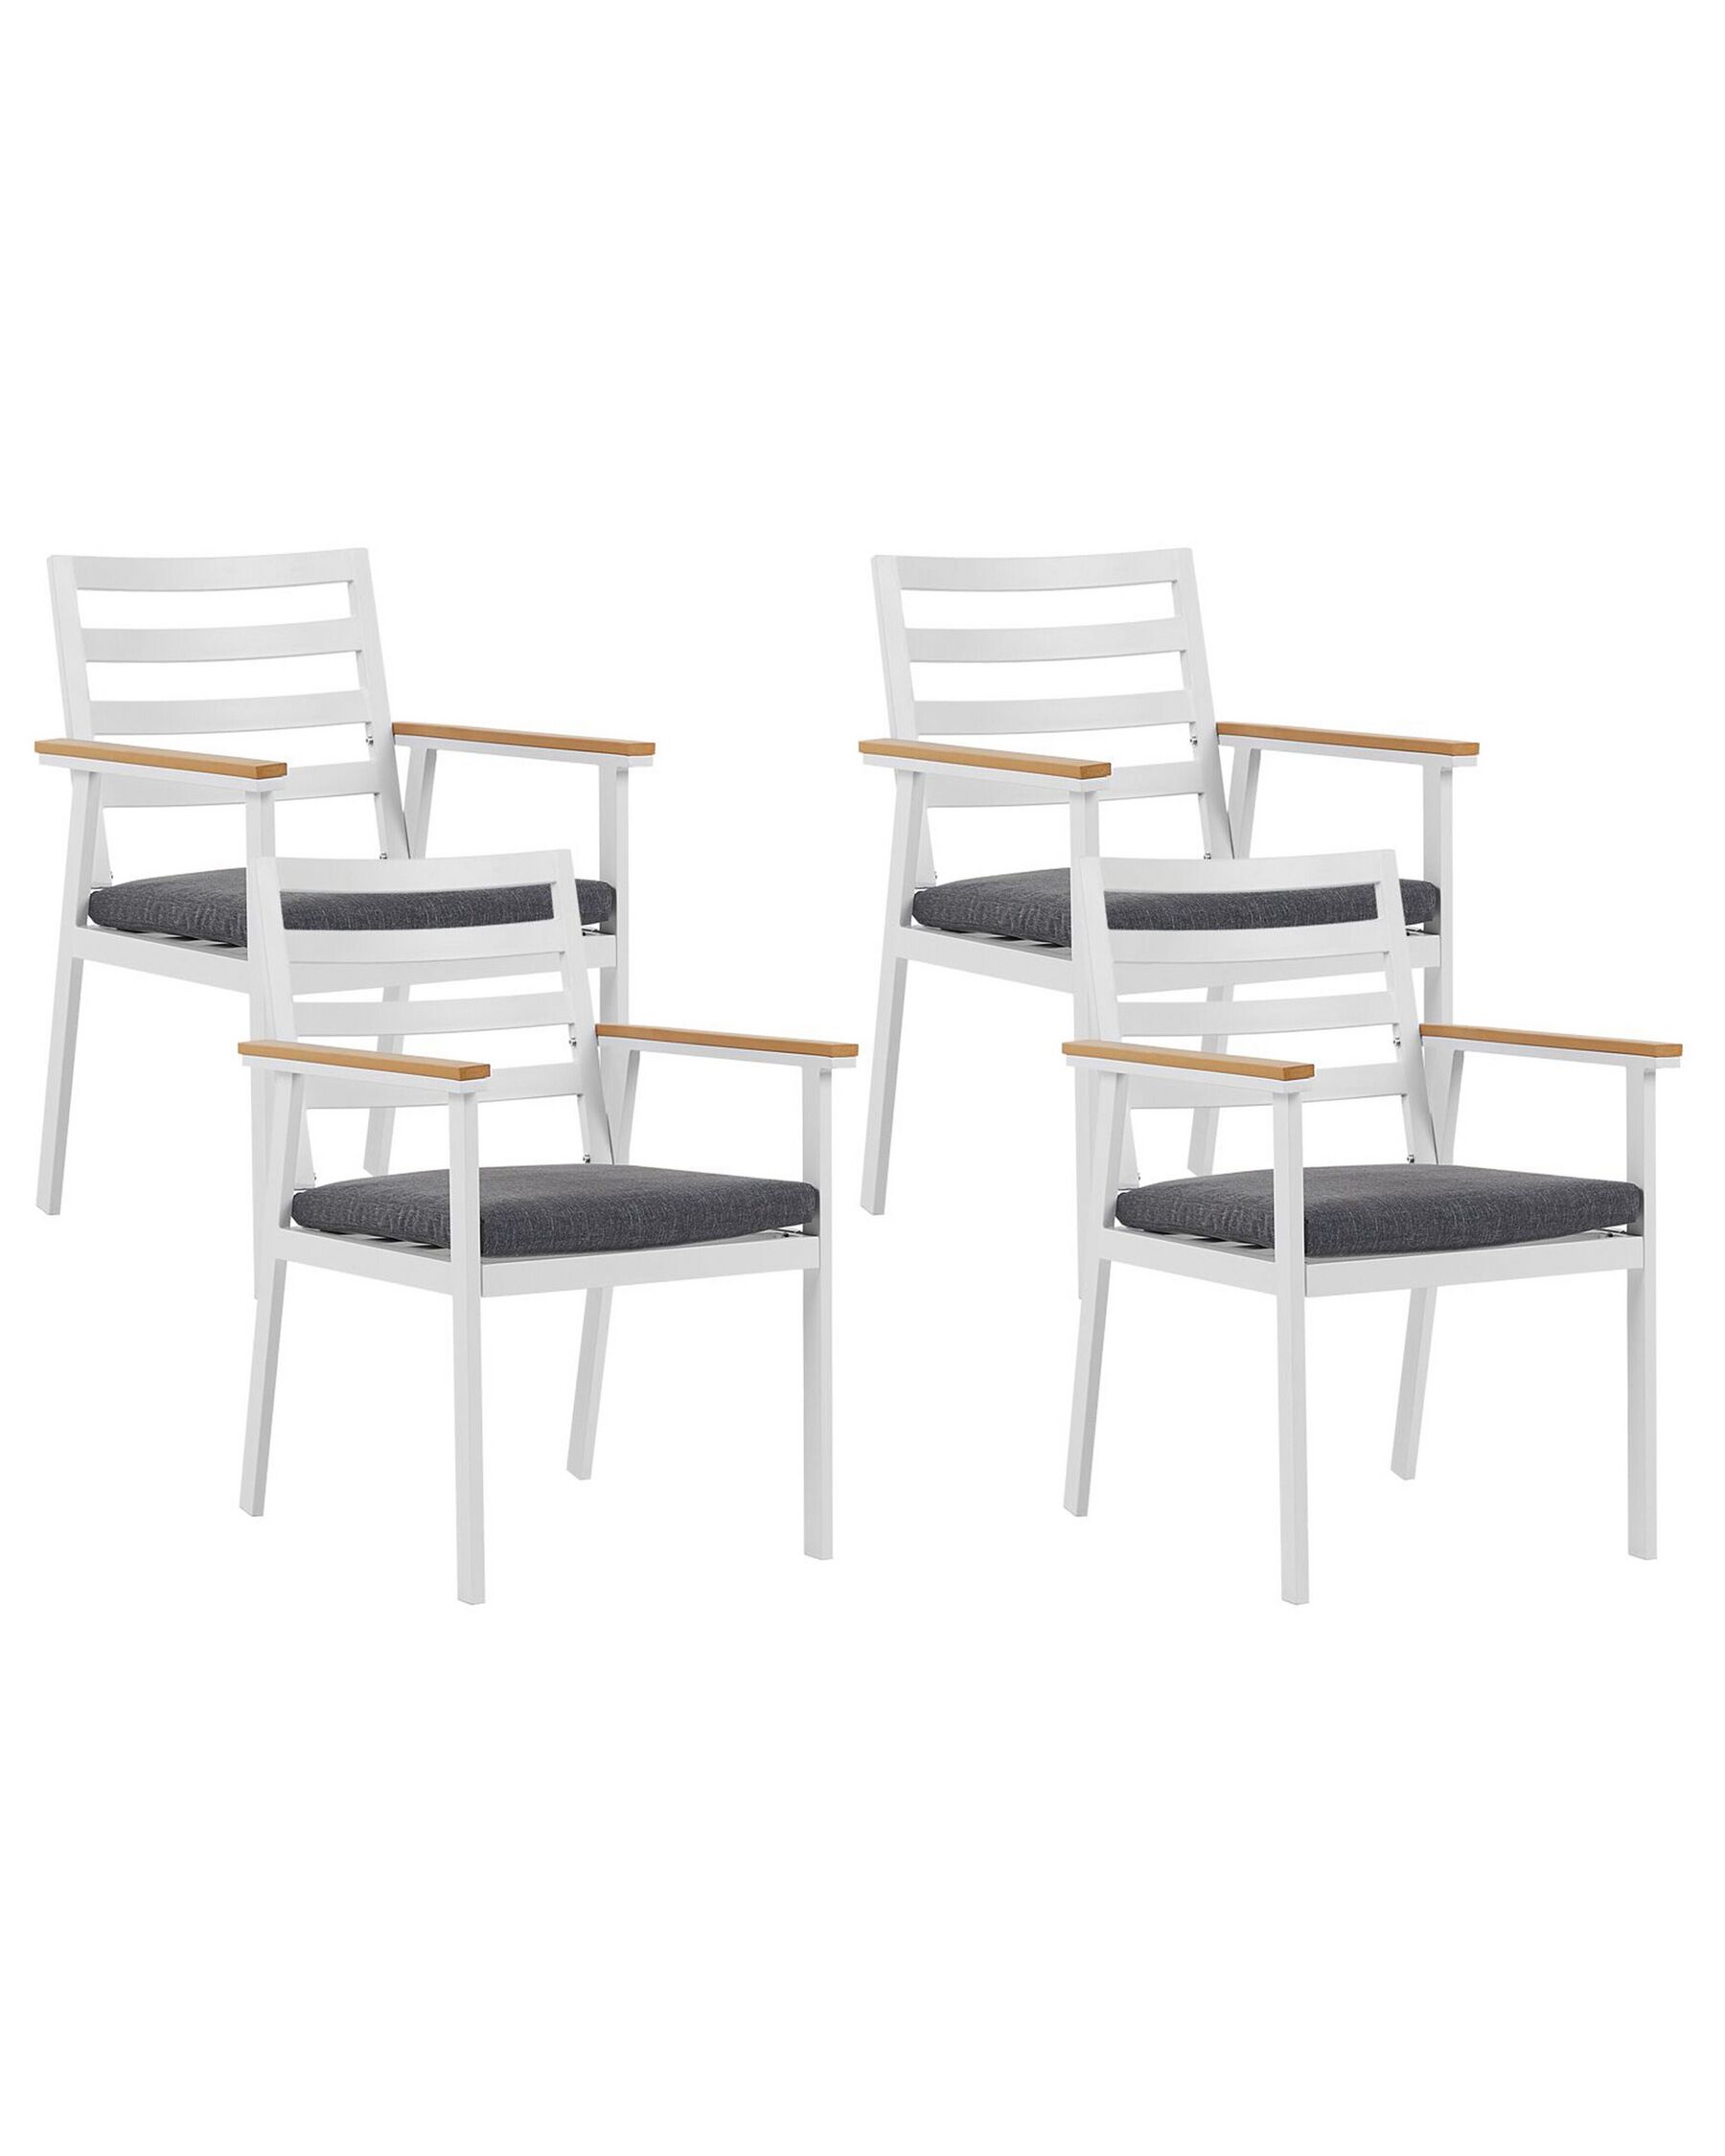 Set of 4 Garden Chairs with Grey Cushions White CAVOLI_777361